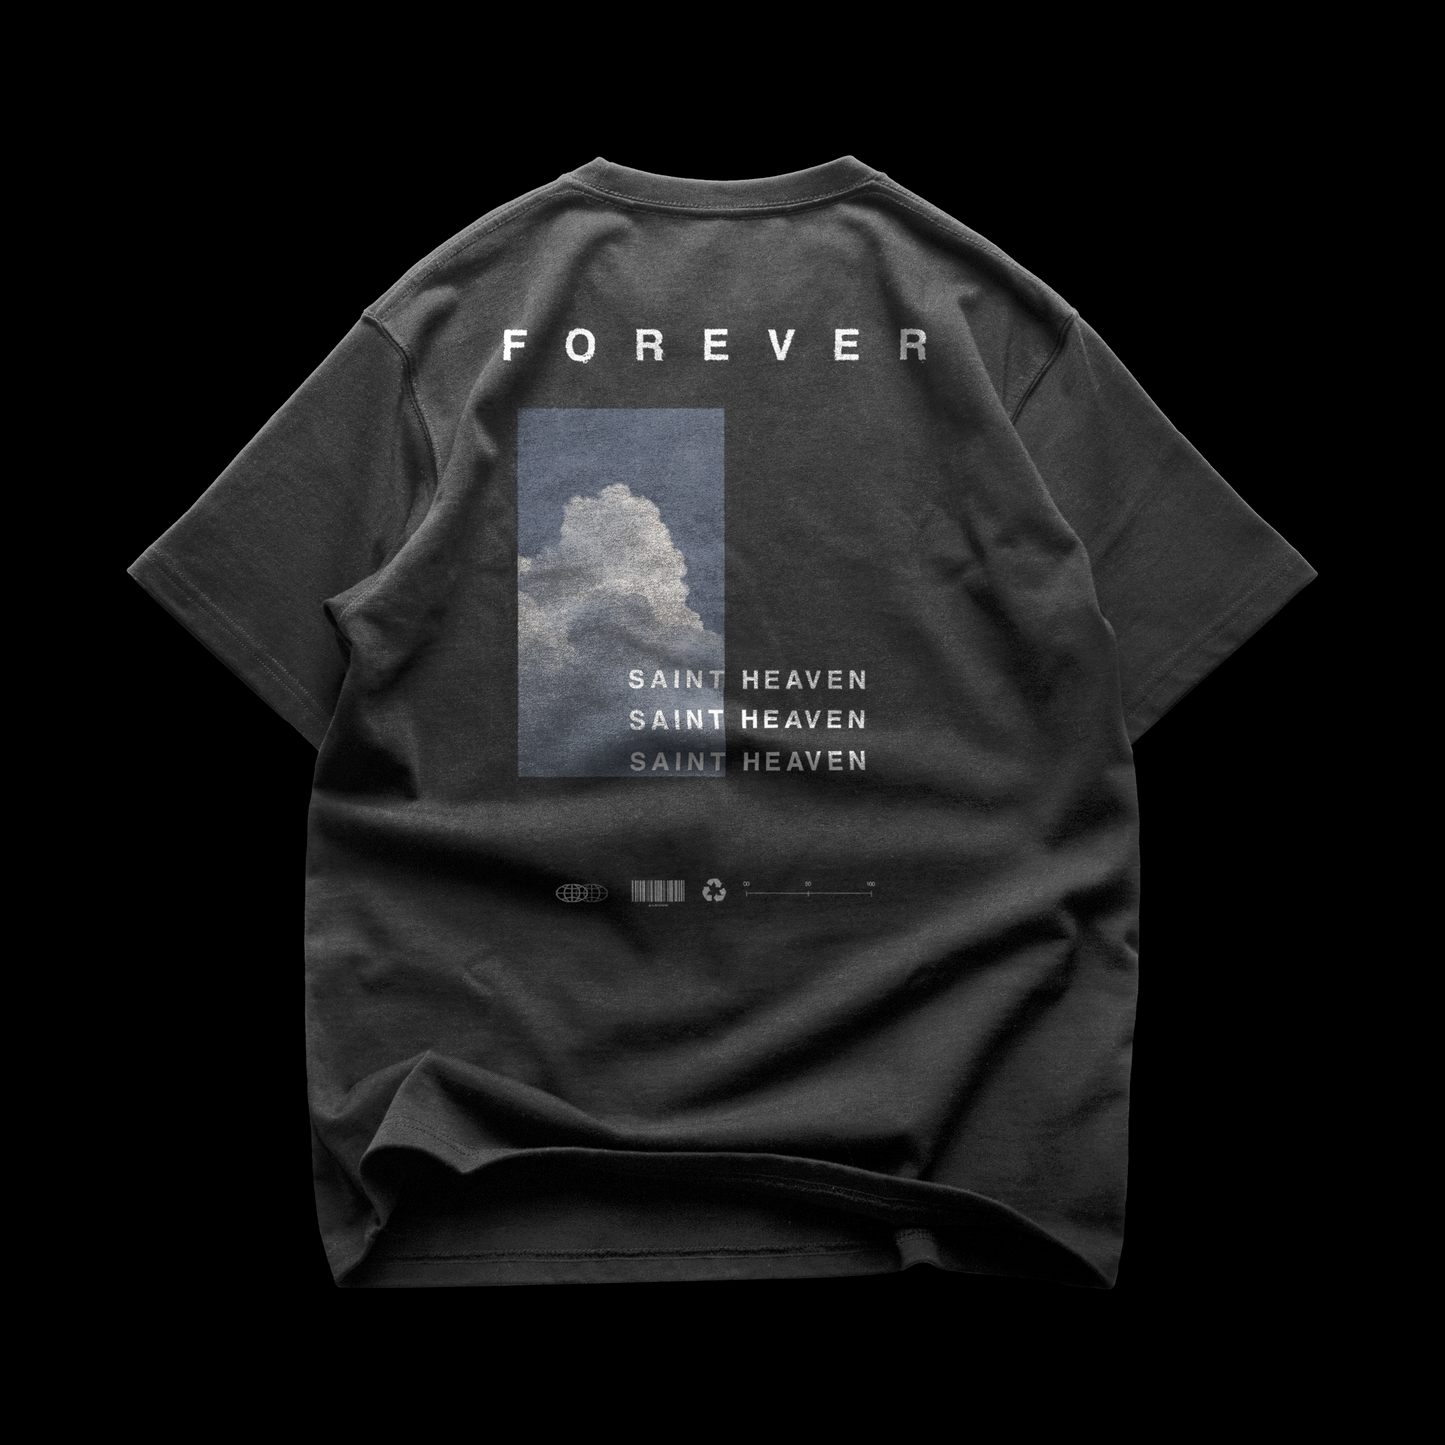 Saint Heaven - Back of T Shirt With Forever Graphic